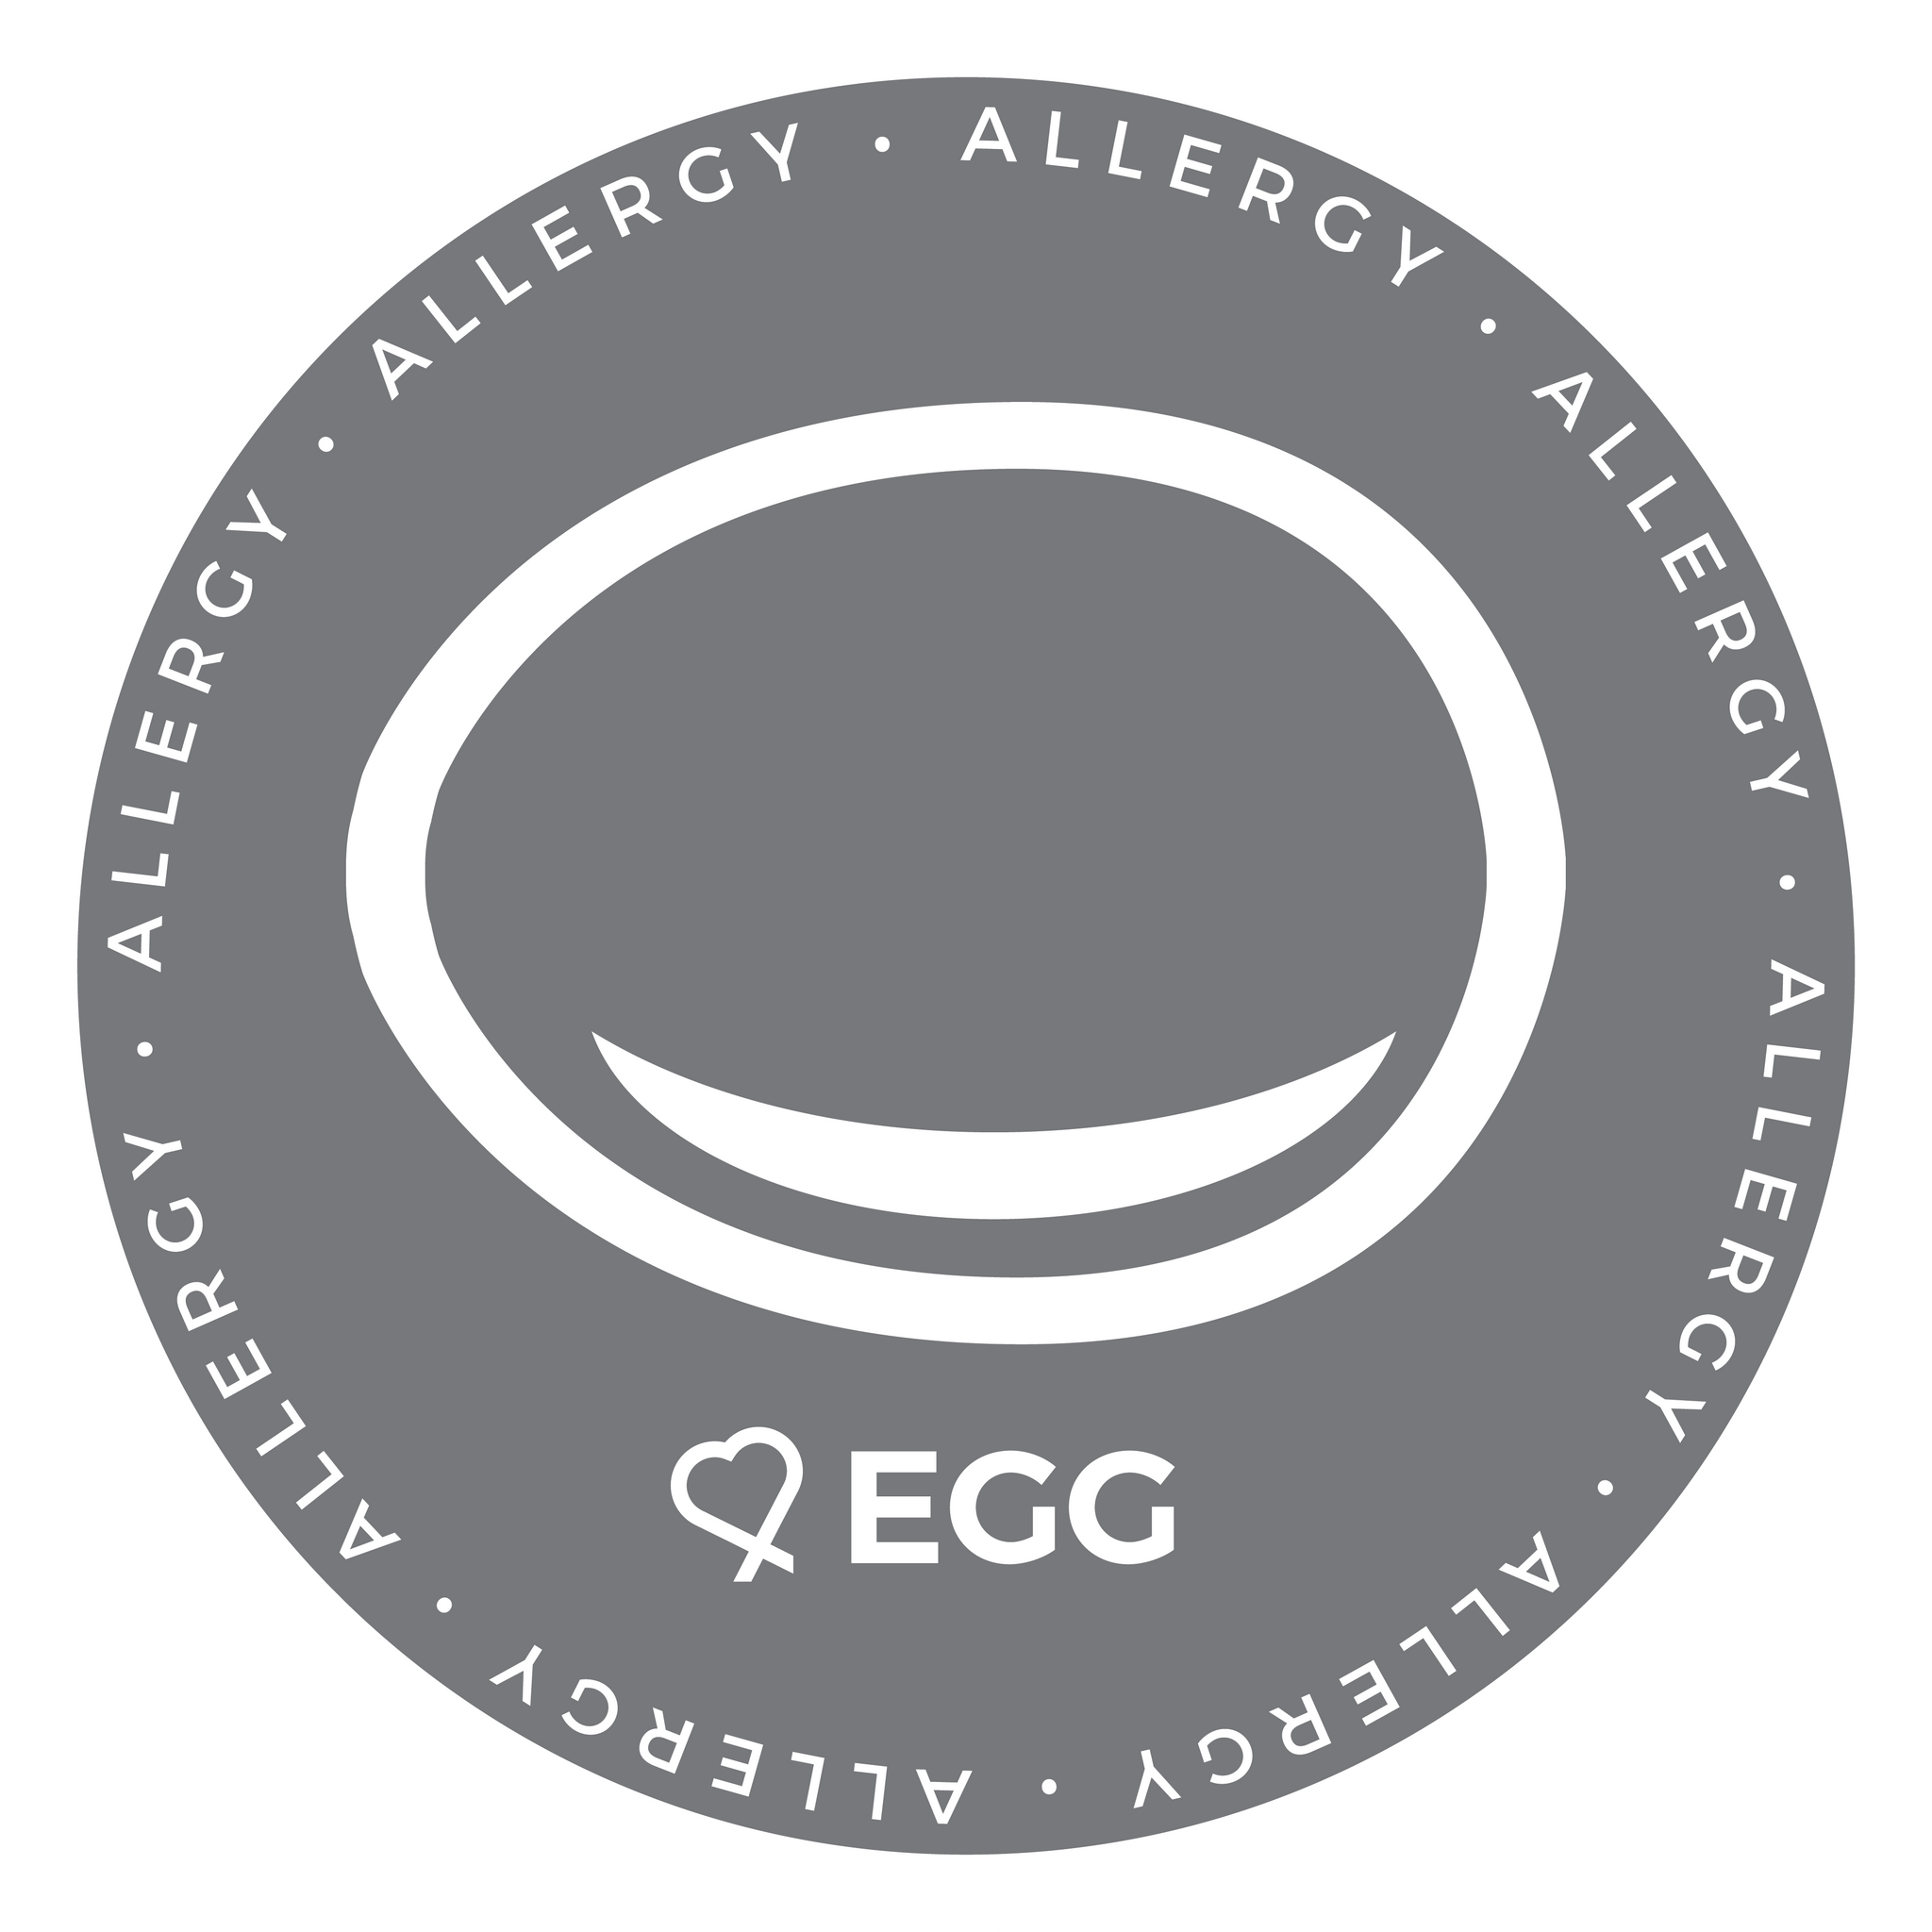 Egg Allergy Patch – Show Your Teal